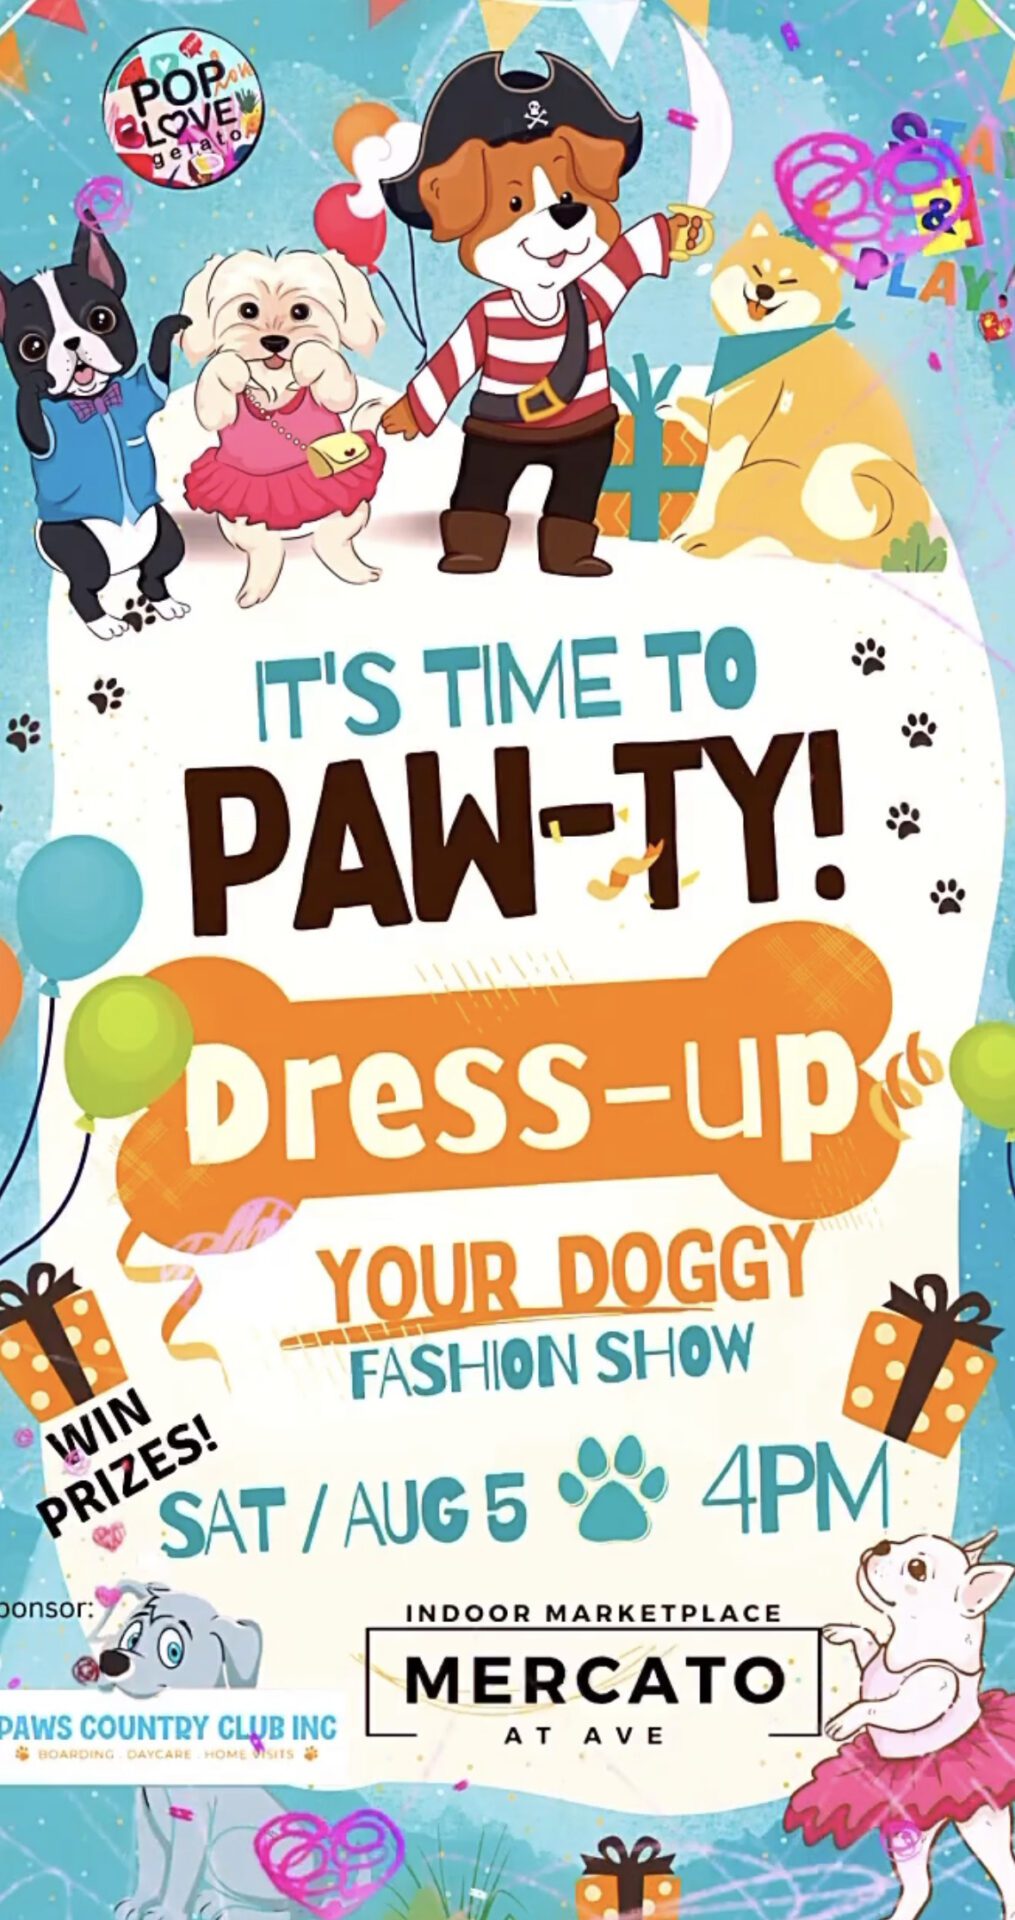 Mercato at Ave Doggy Fashion Show Flyer